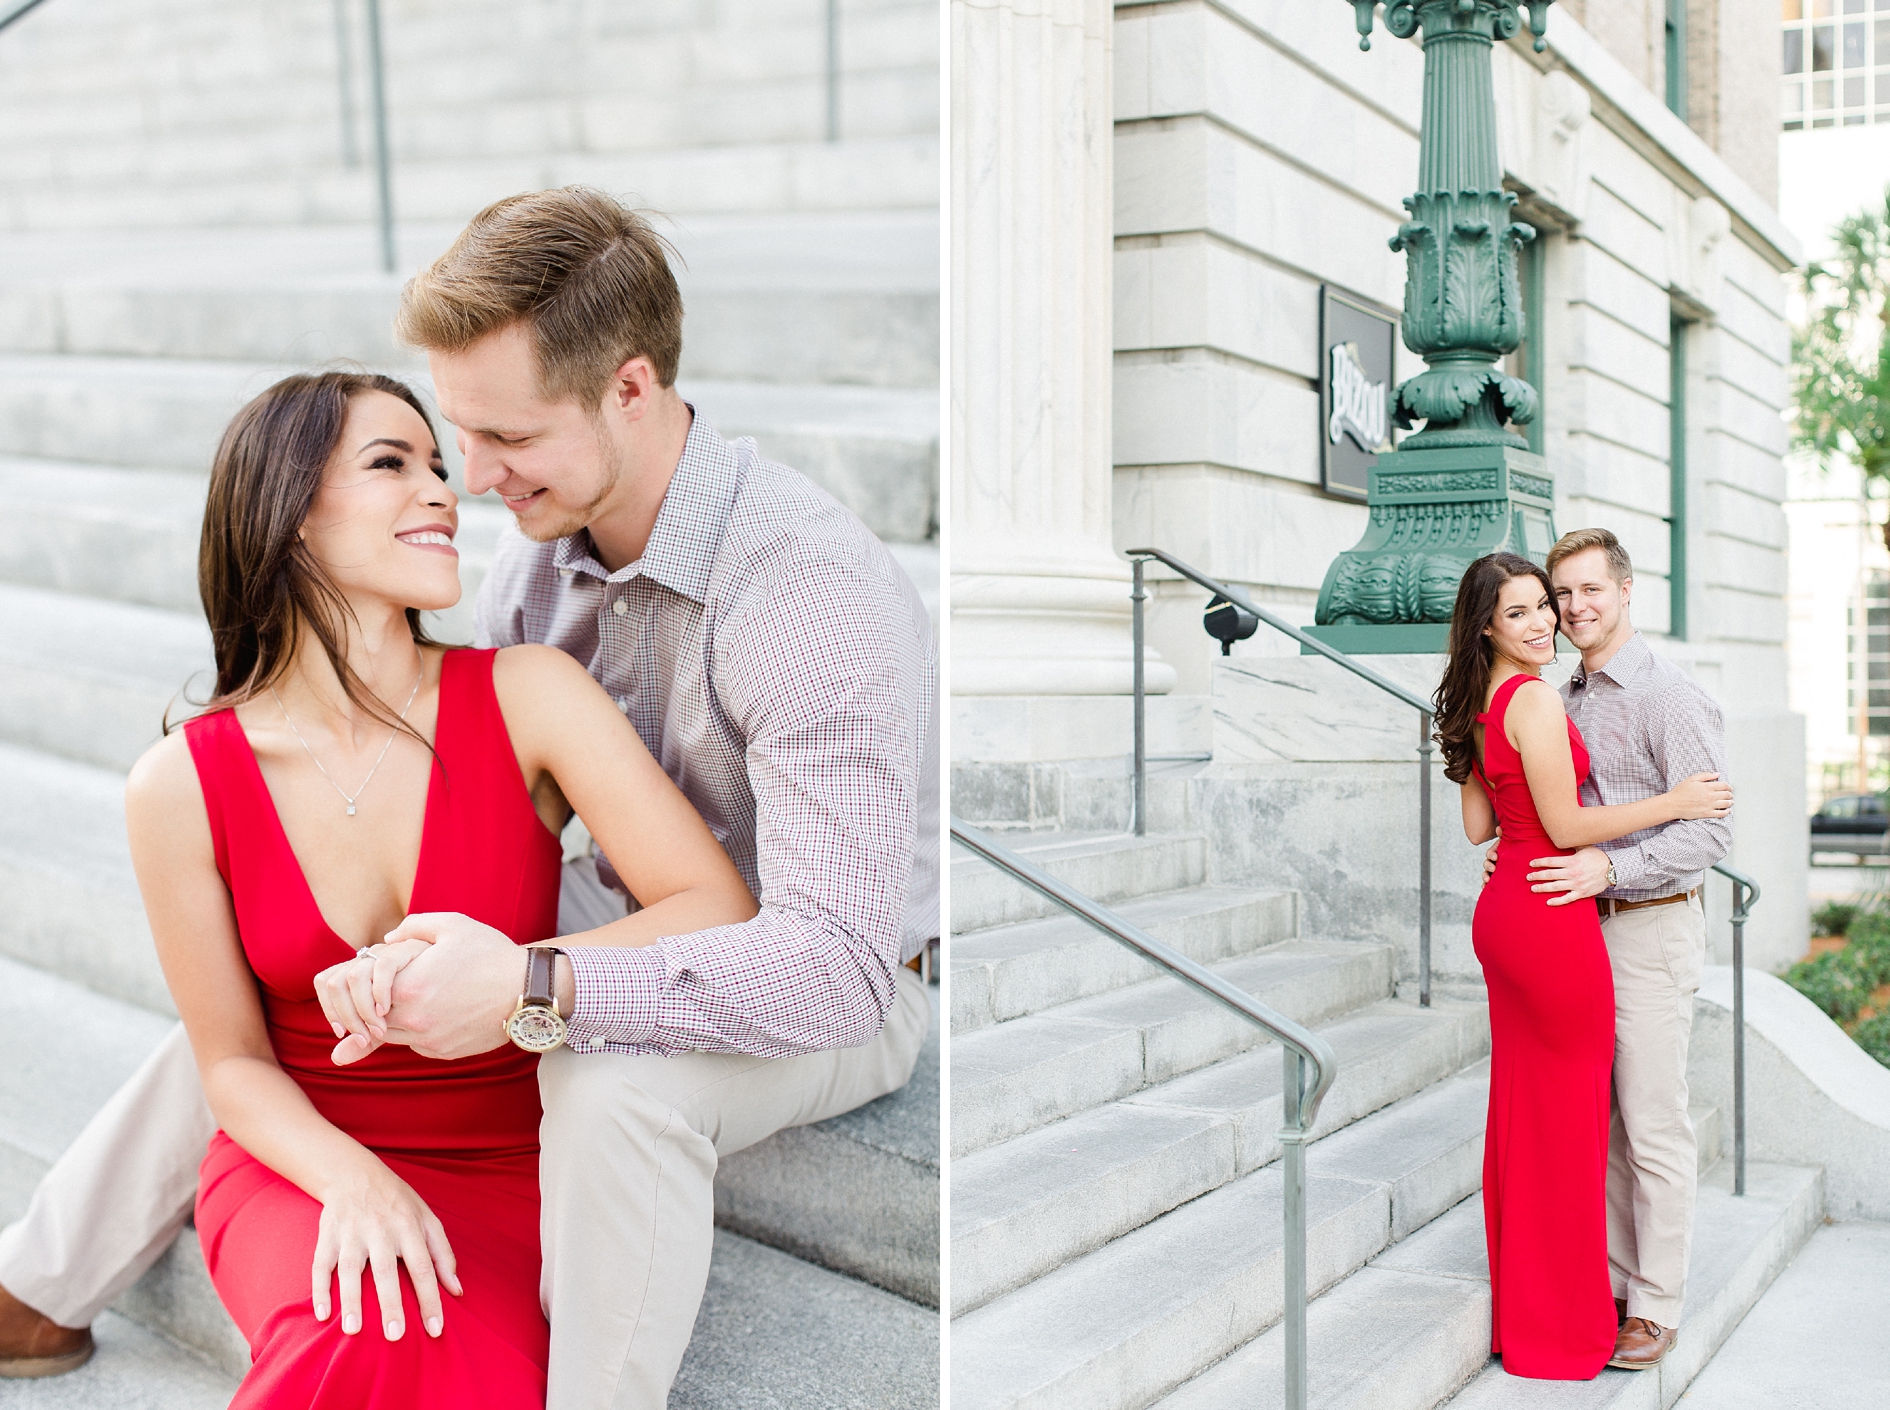 Downtown Tampa Engagement | © Ailyn La Torre Photography 2017